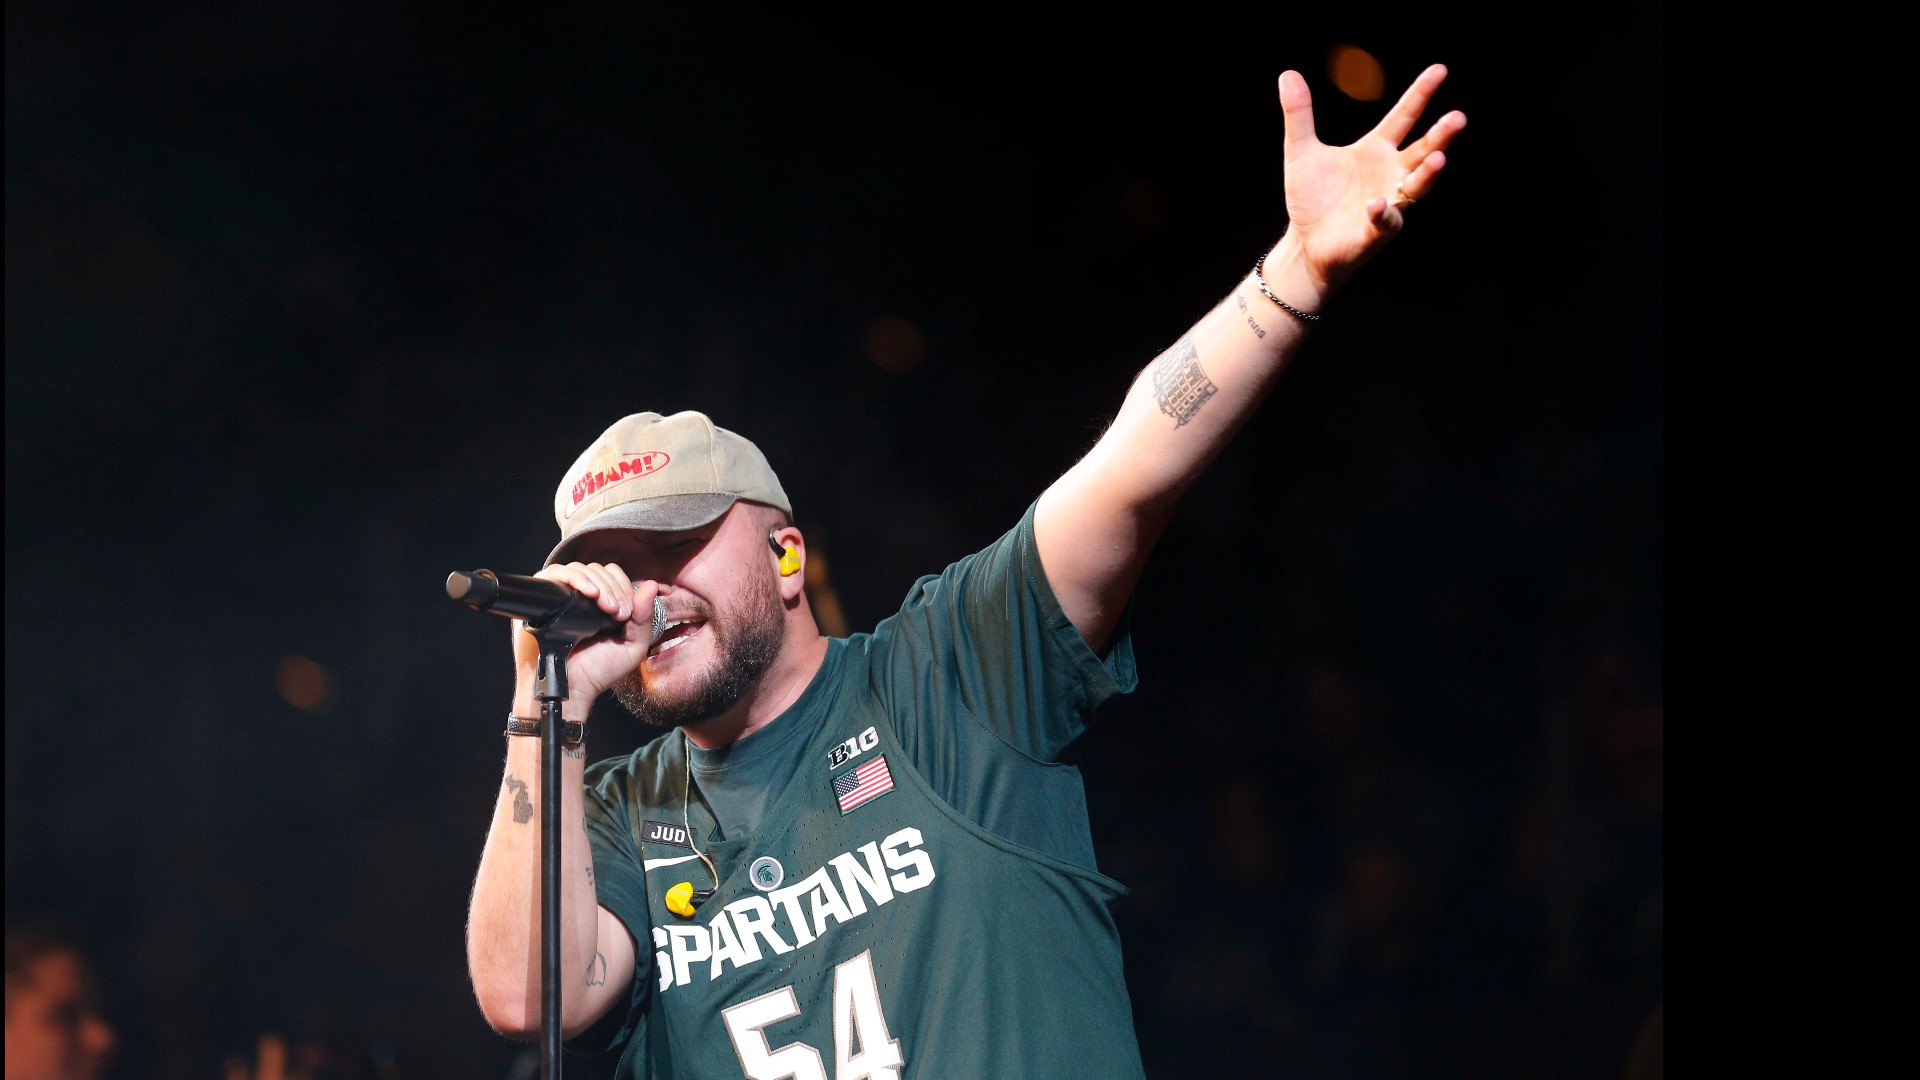 Quinn XCII to headline Red Rocks in May 2020